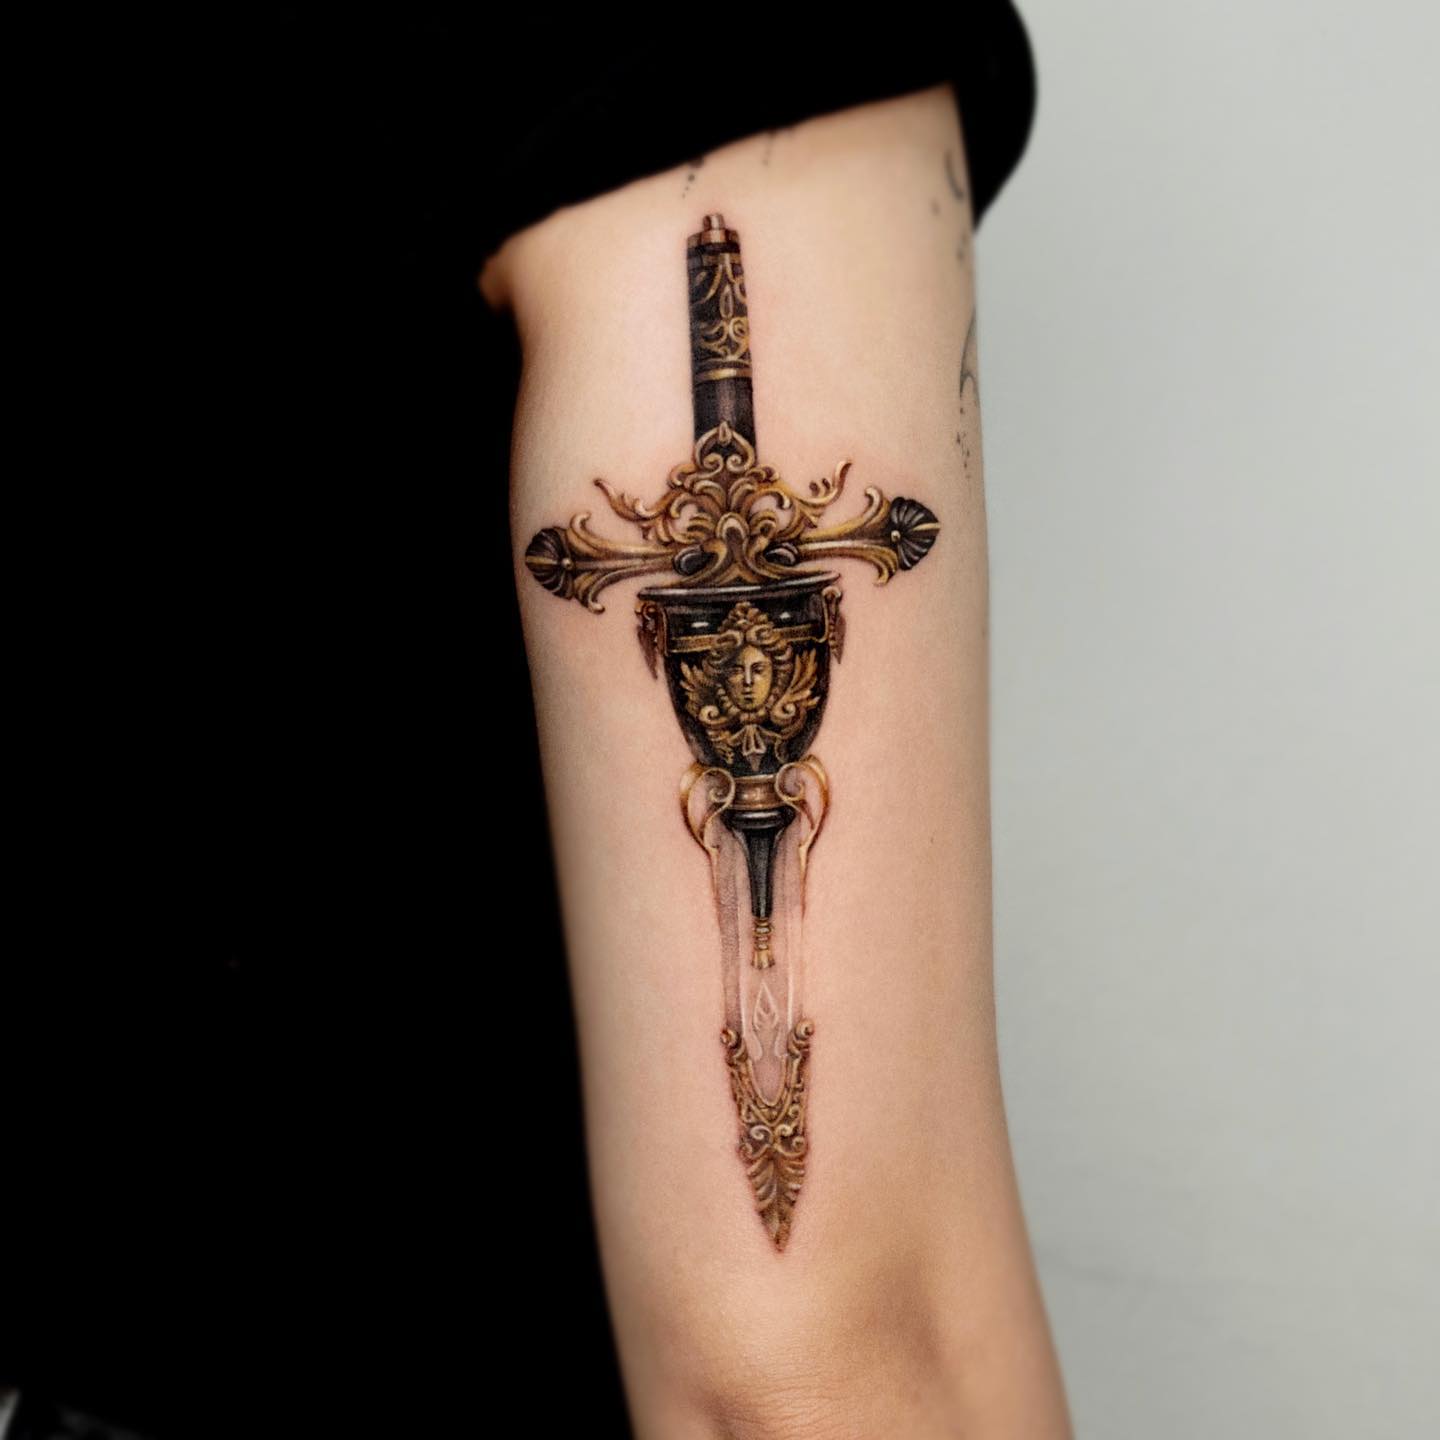 Chrome hearts dagger  for my little brother  chromeheartsofficial       tattoo tattoos tattooflash traditionalflash  Instagram